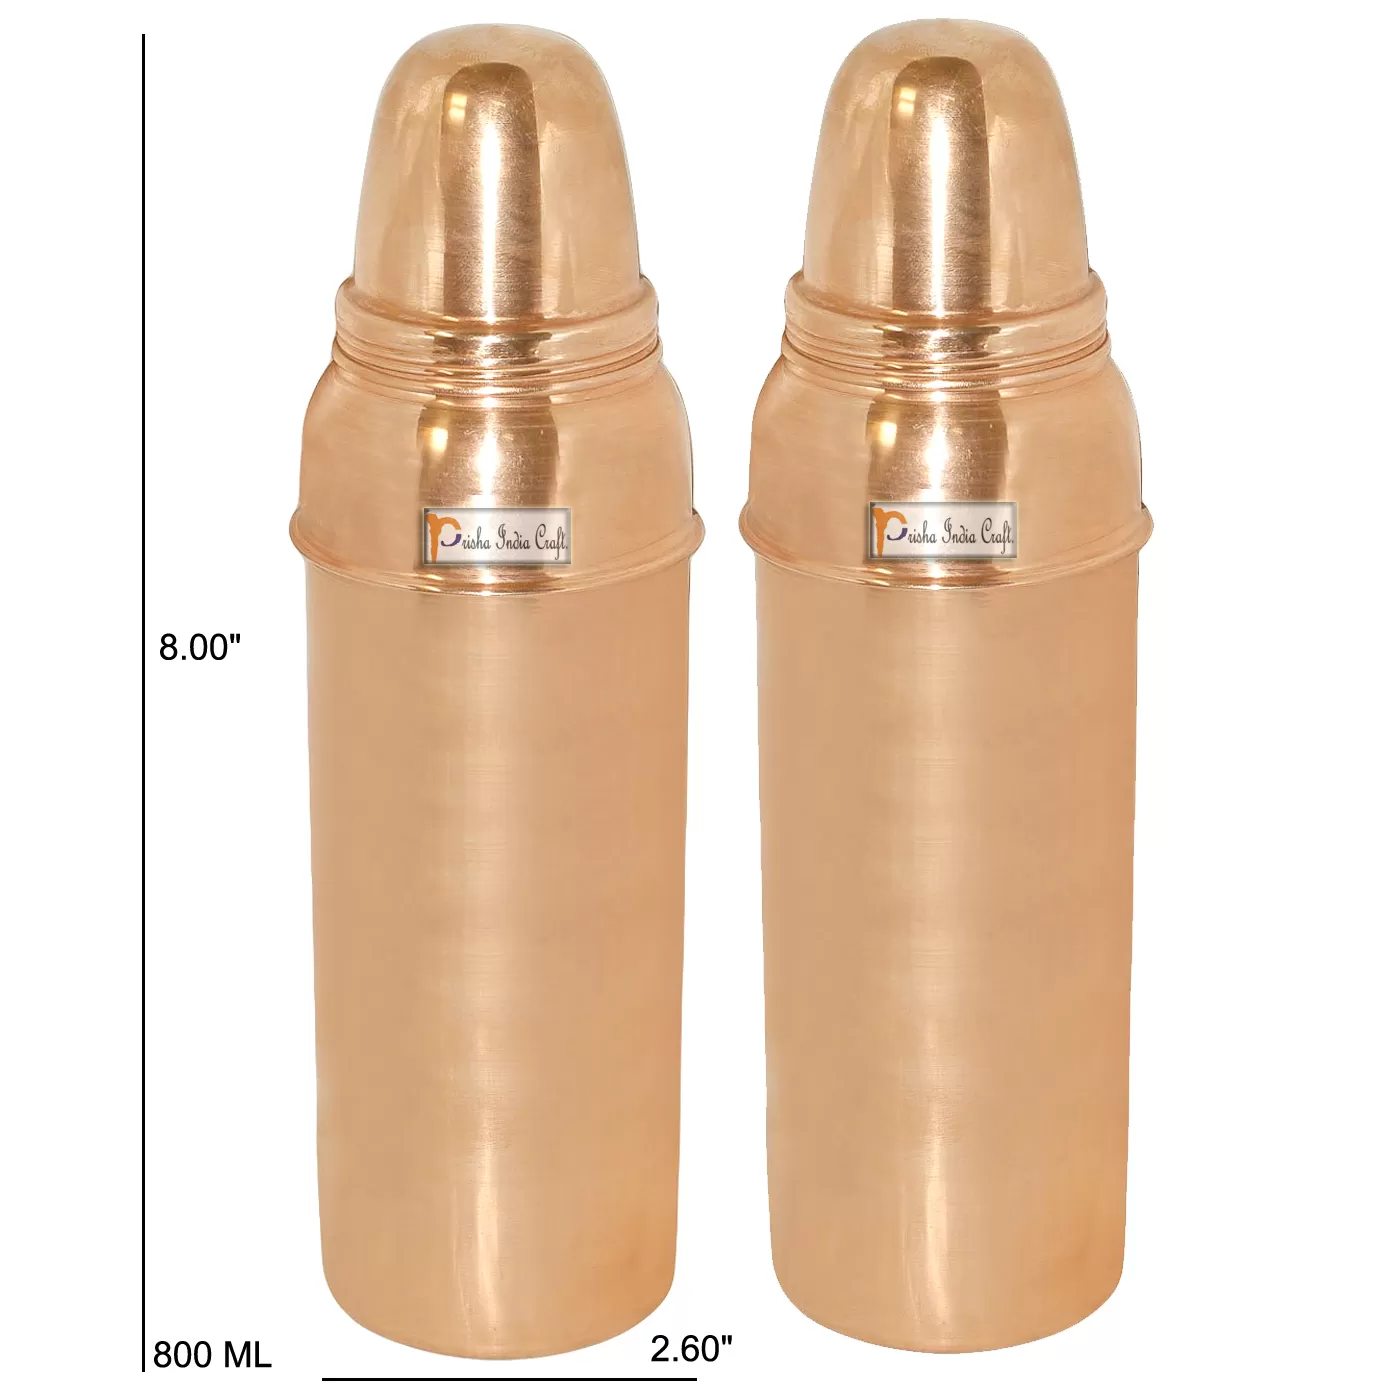 800 ML / 27 oz - Set of 2 - DIWALI GIFT Pure Copper Water Bottle Pitcher for Ayurvedic Health Benefits